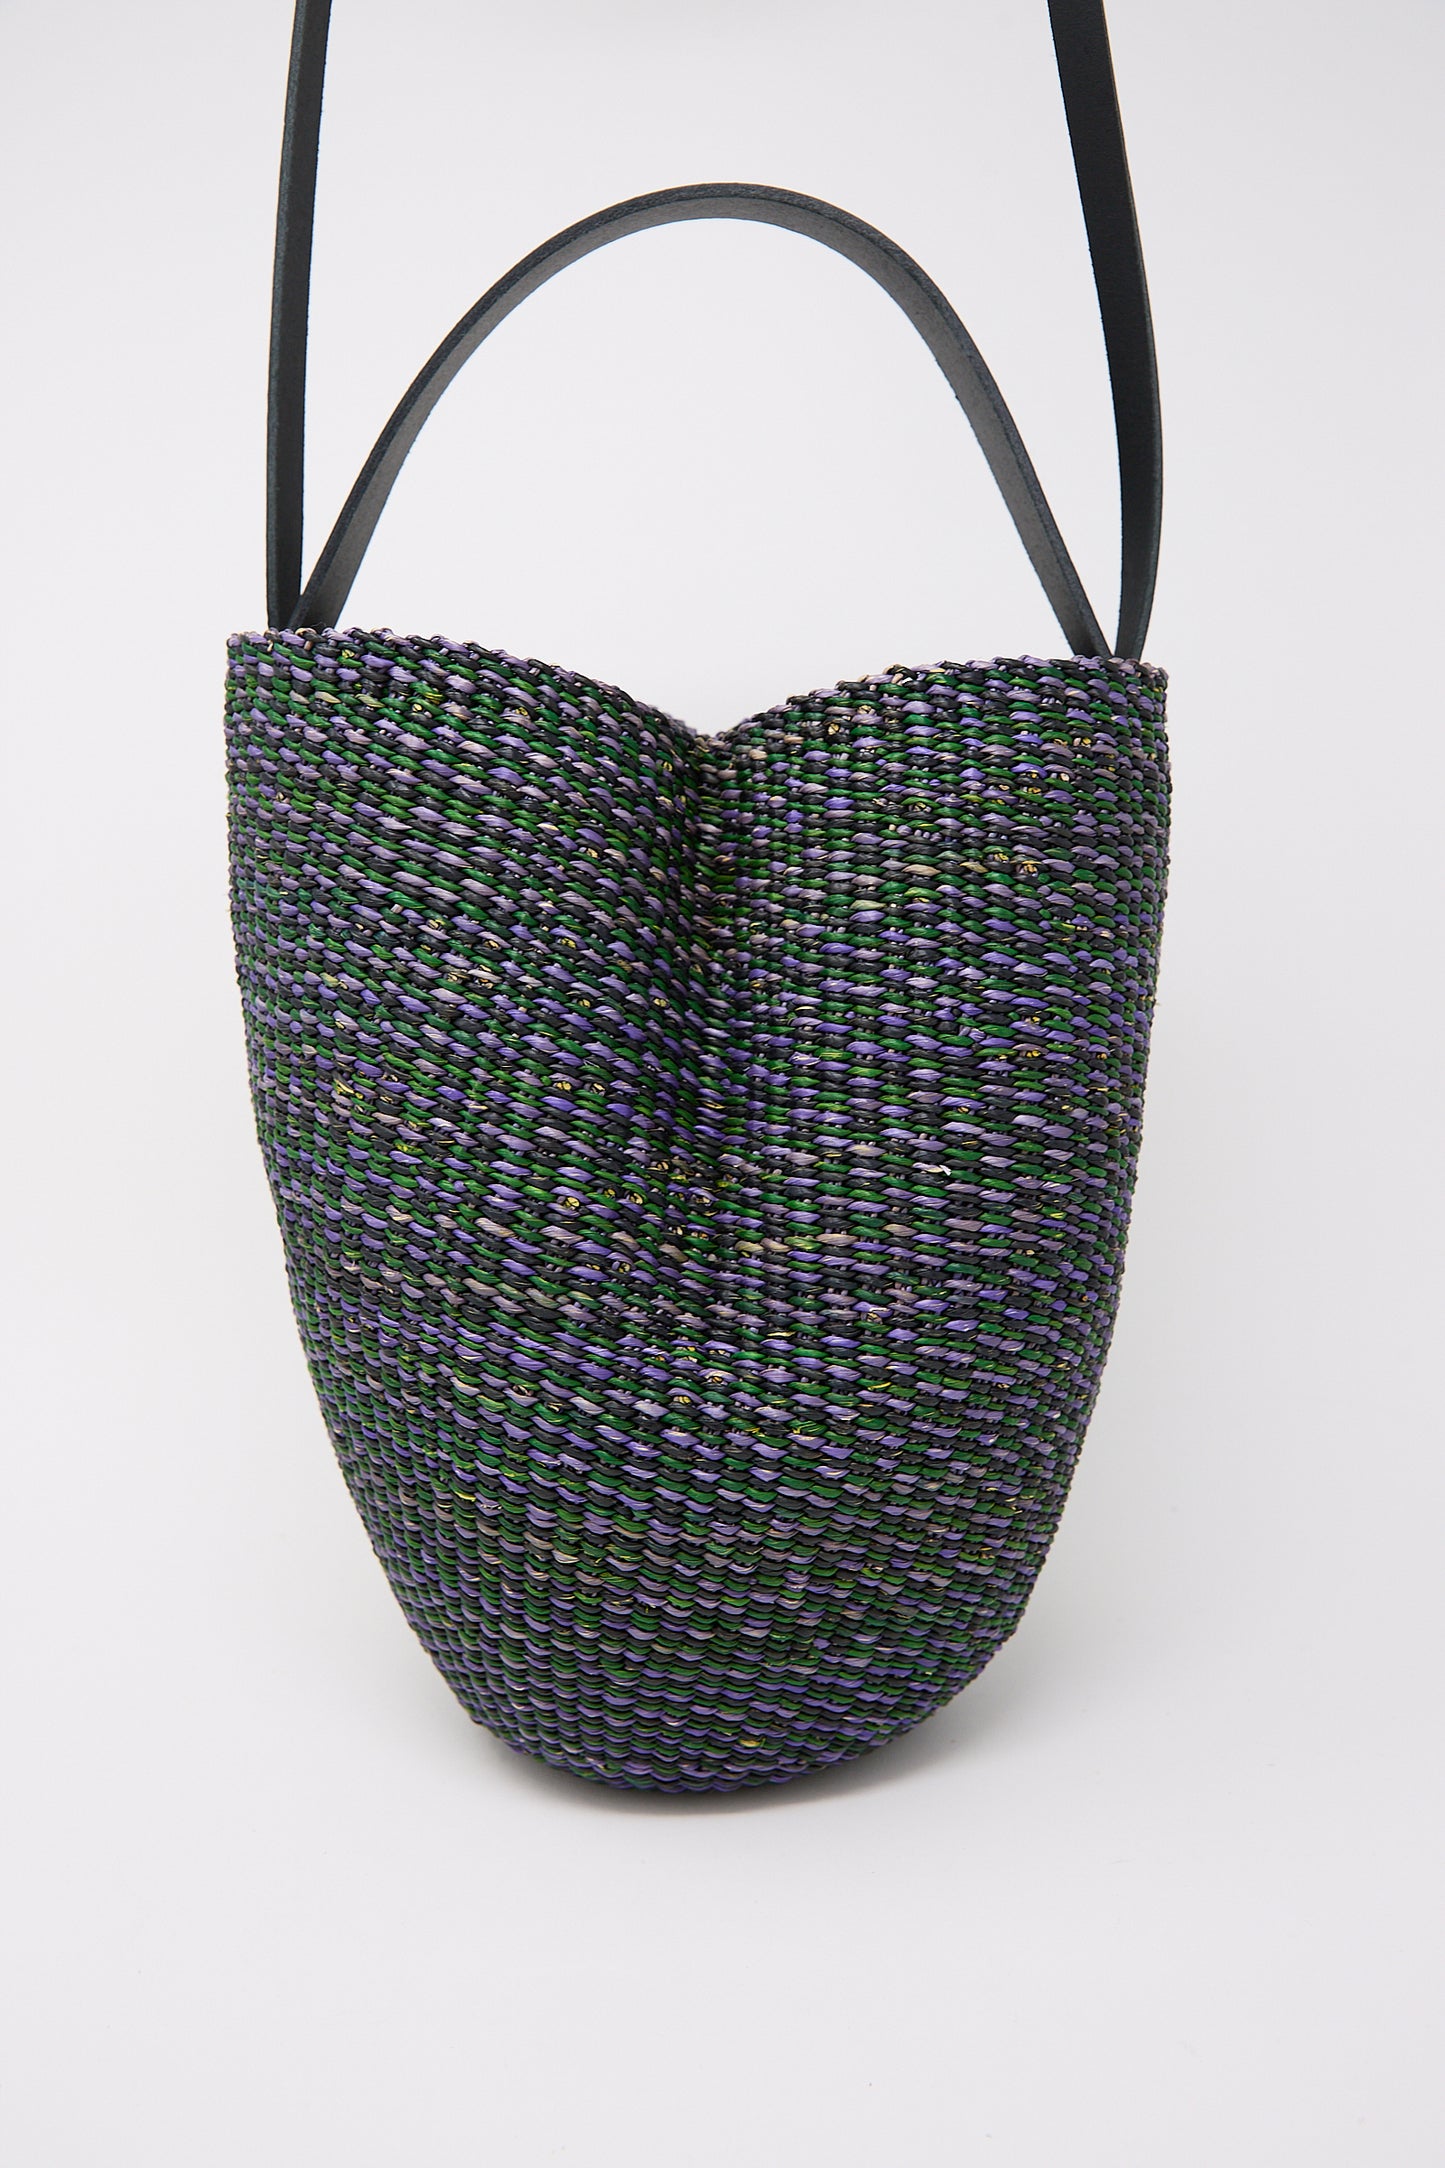 Handwoven N. 36 Haricot Bag in Green crafted from elephant grass with a multicolored pattern and black straps against a white background by Inès Bressand.